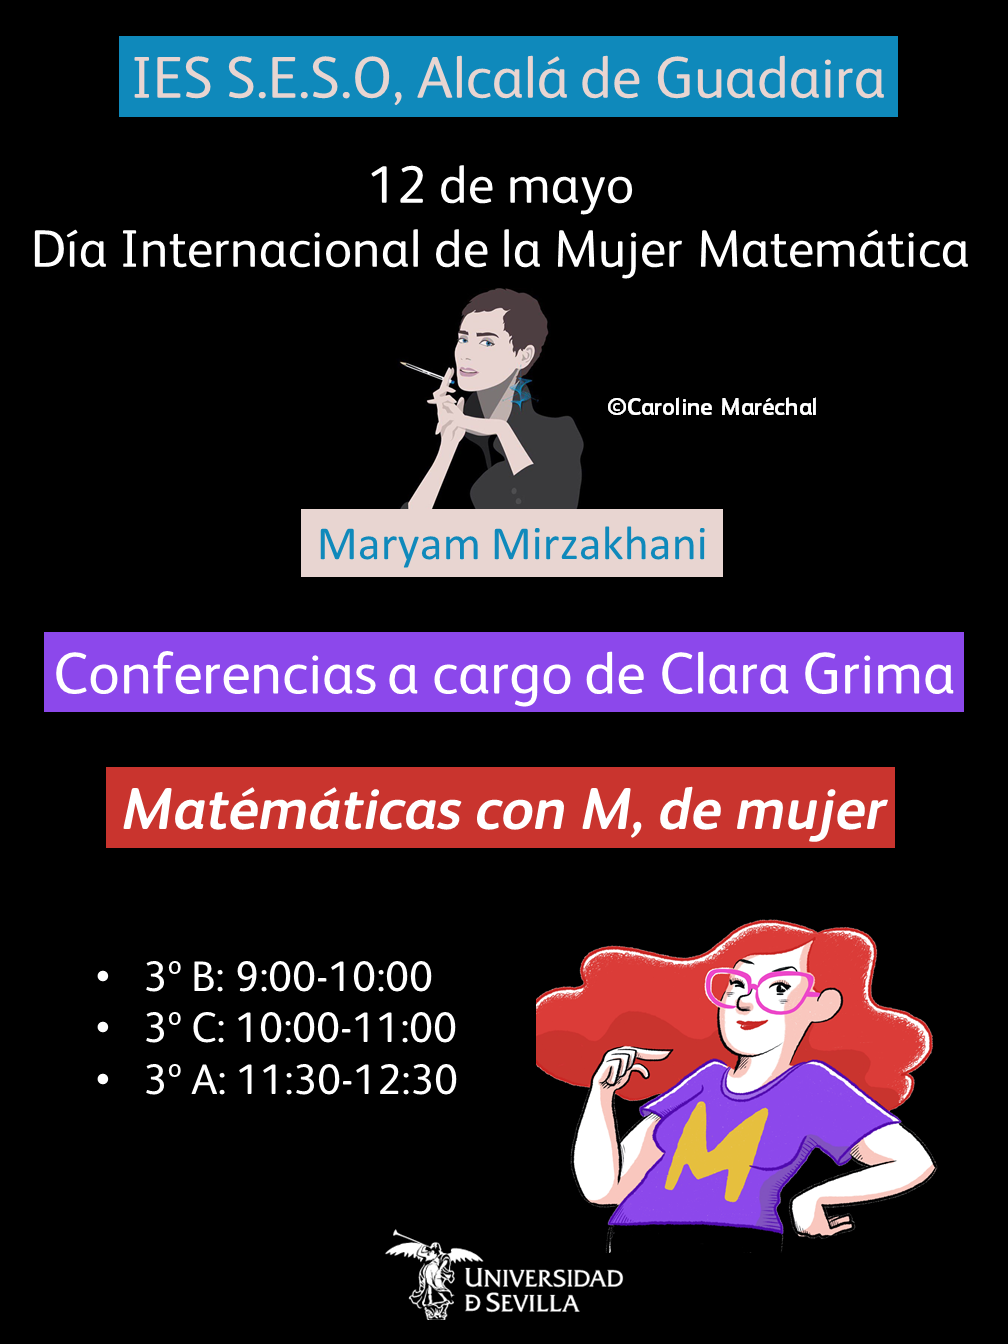 Facts about Clara Grima's conference